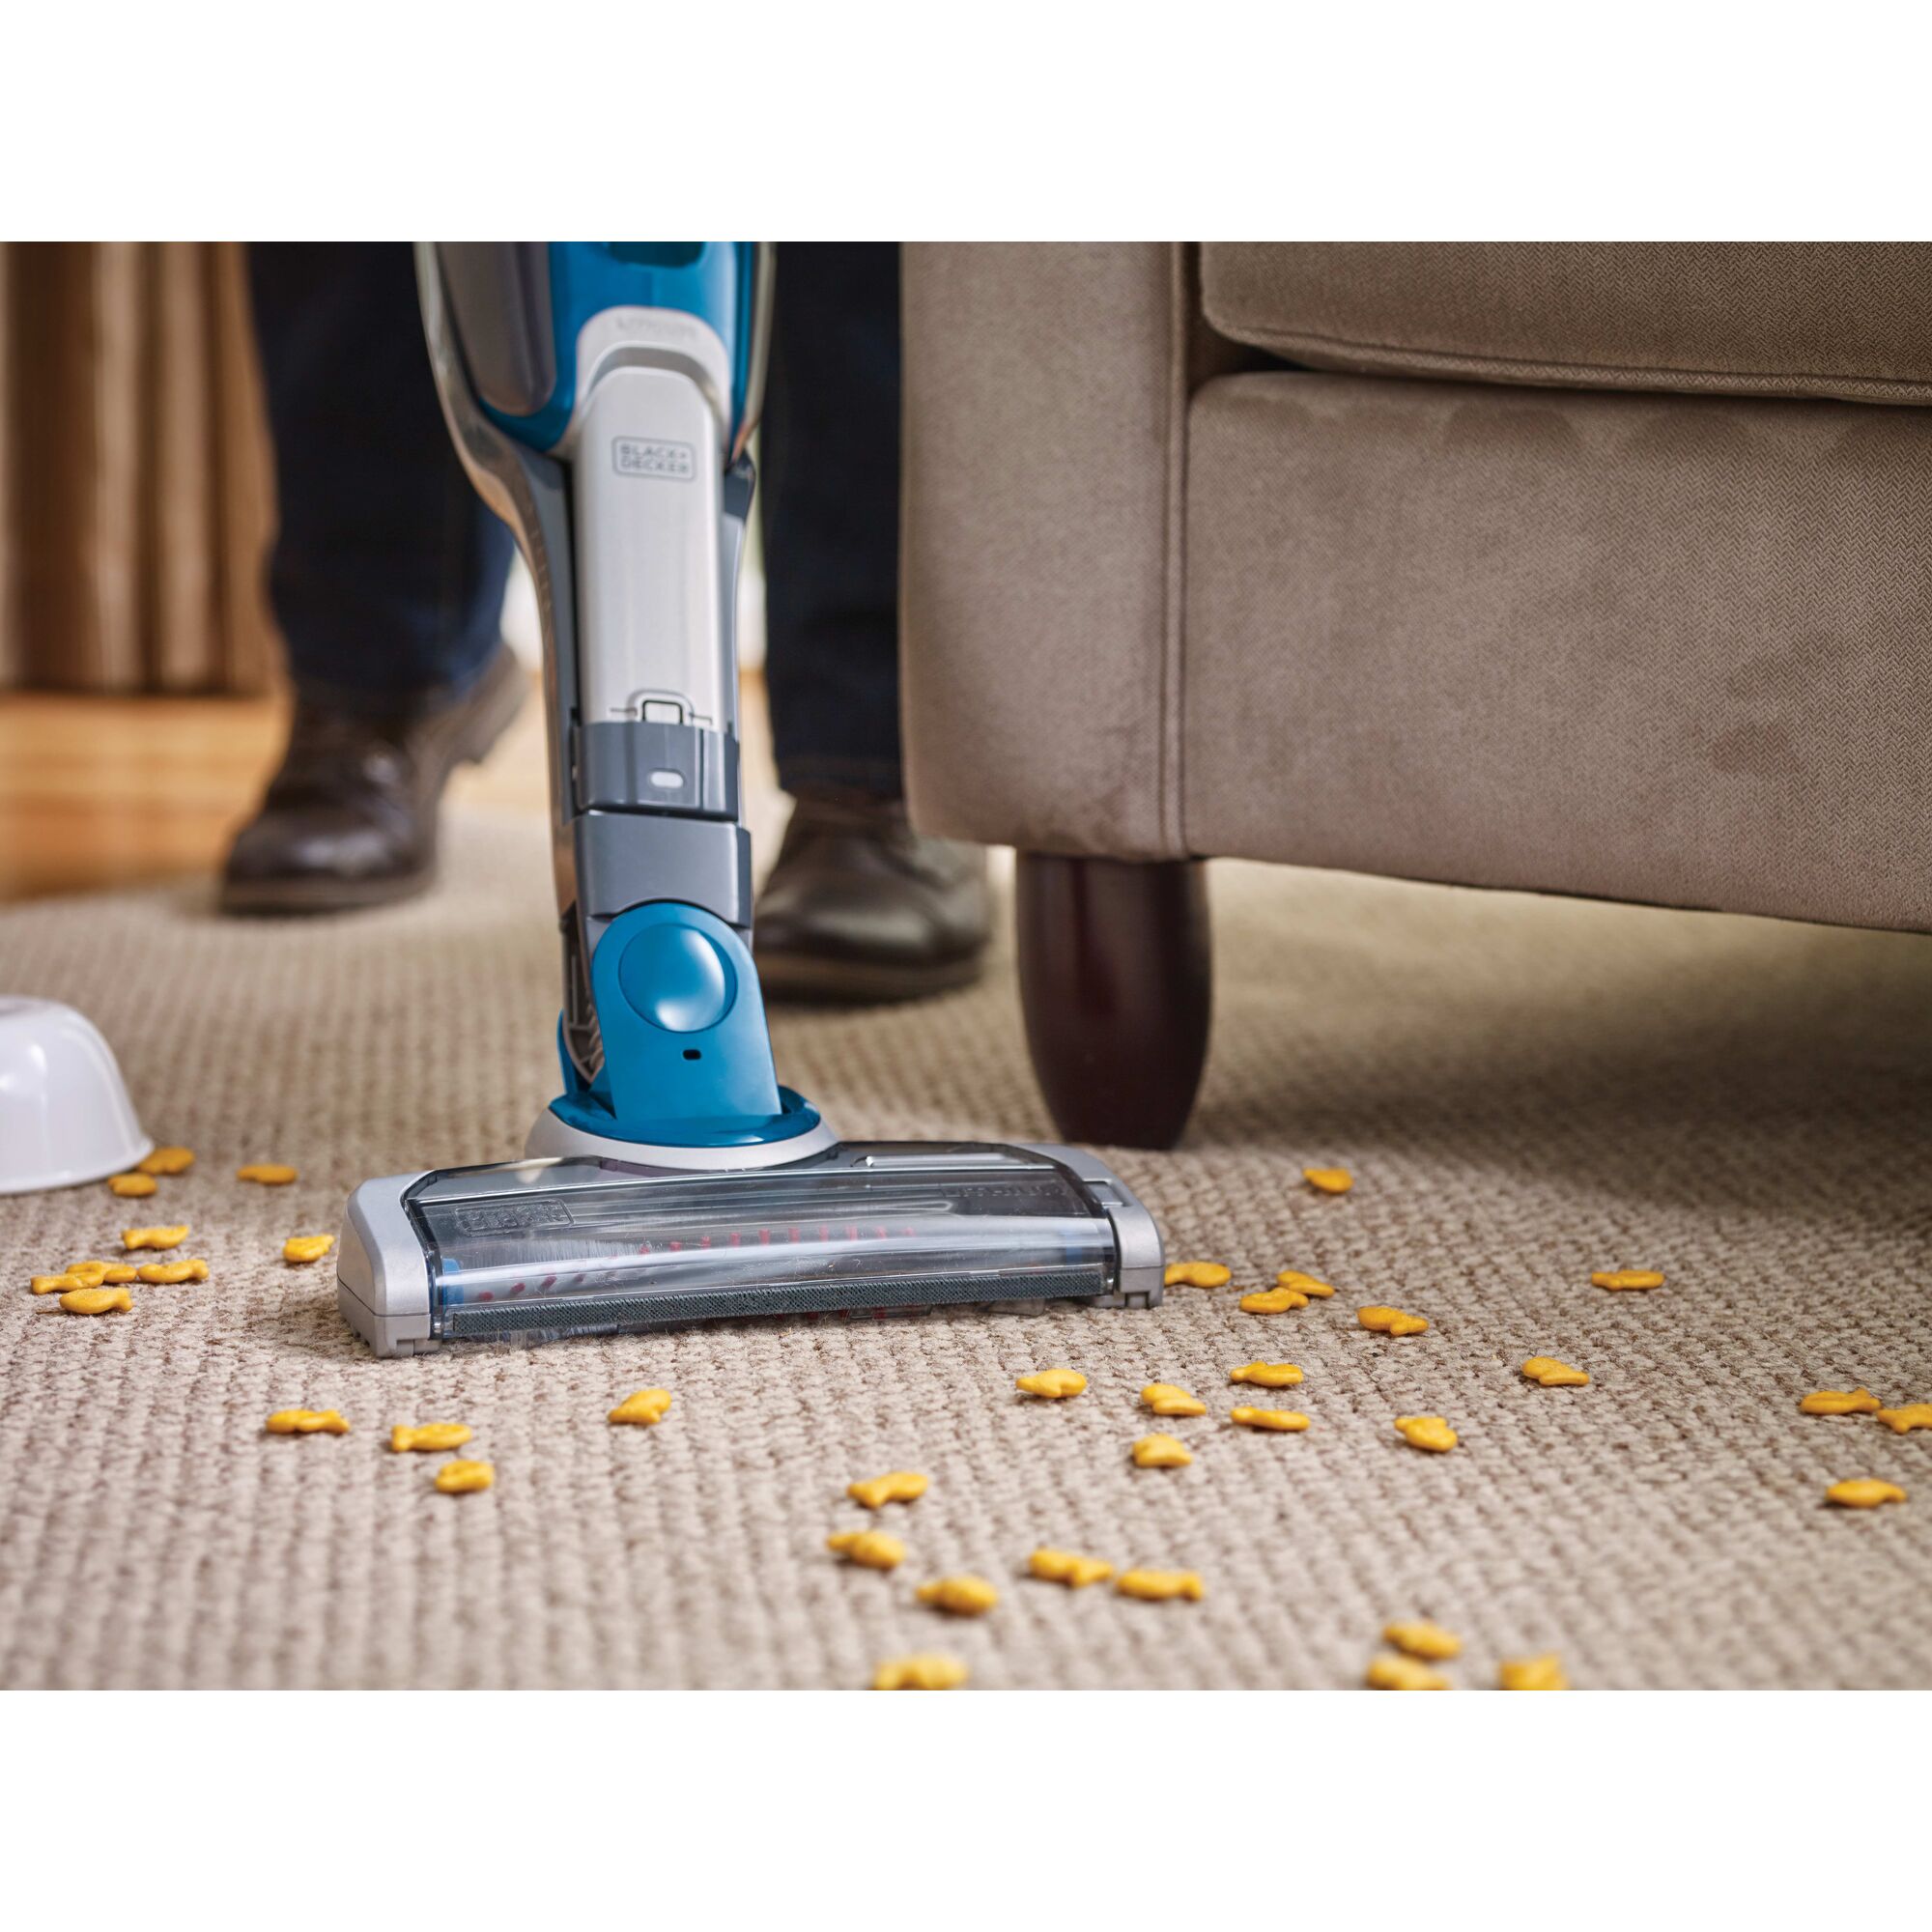 Cordless Lithium 2 in 1 Stick Vacuum being used to clean spilt food from carpet.